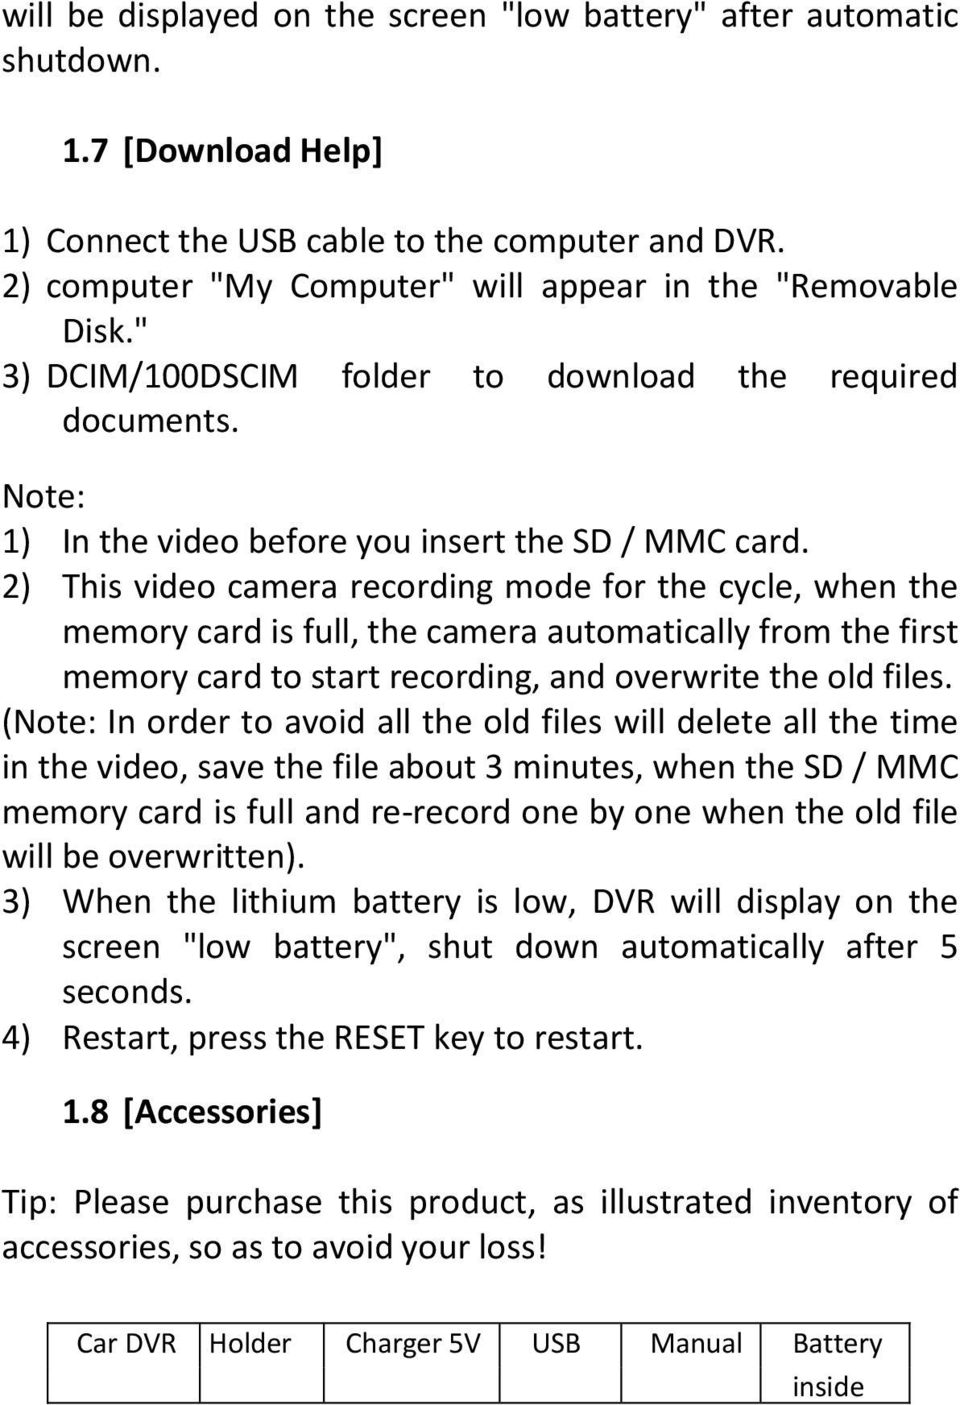 2) This video camera recording mode for the cycle, when the memory card is full, the camera automatically from the first memory card to start recording, and overwrite the old files.